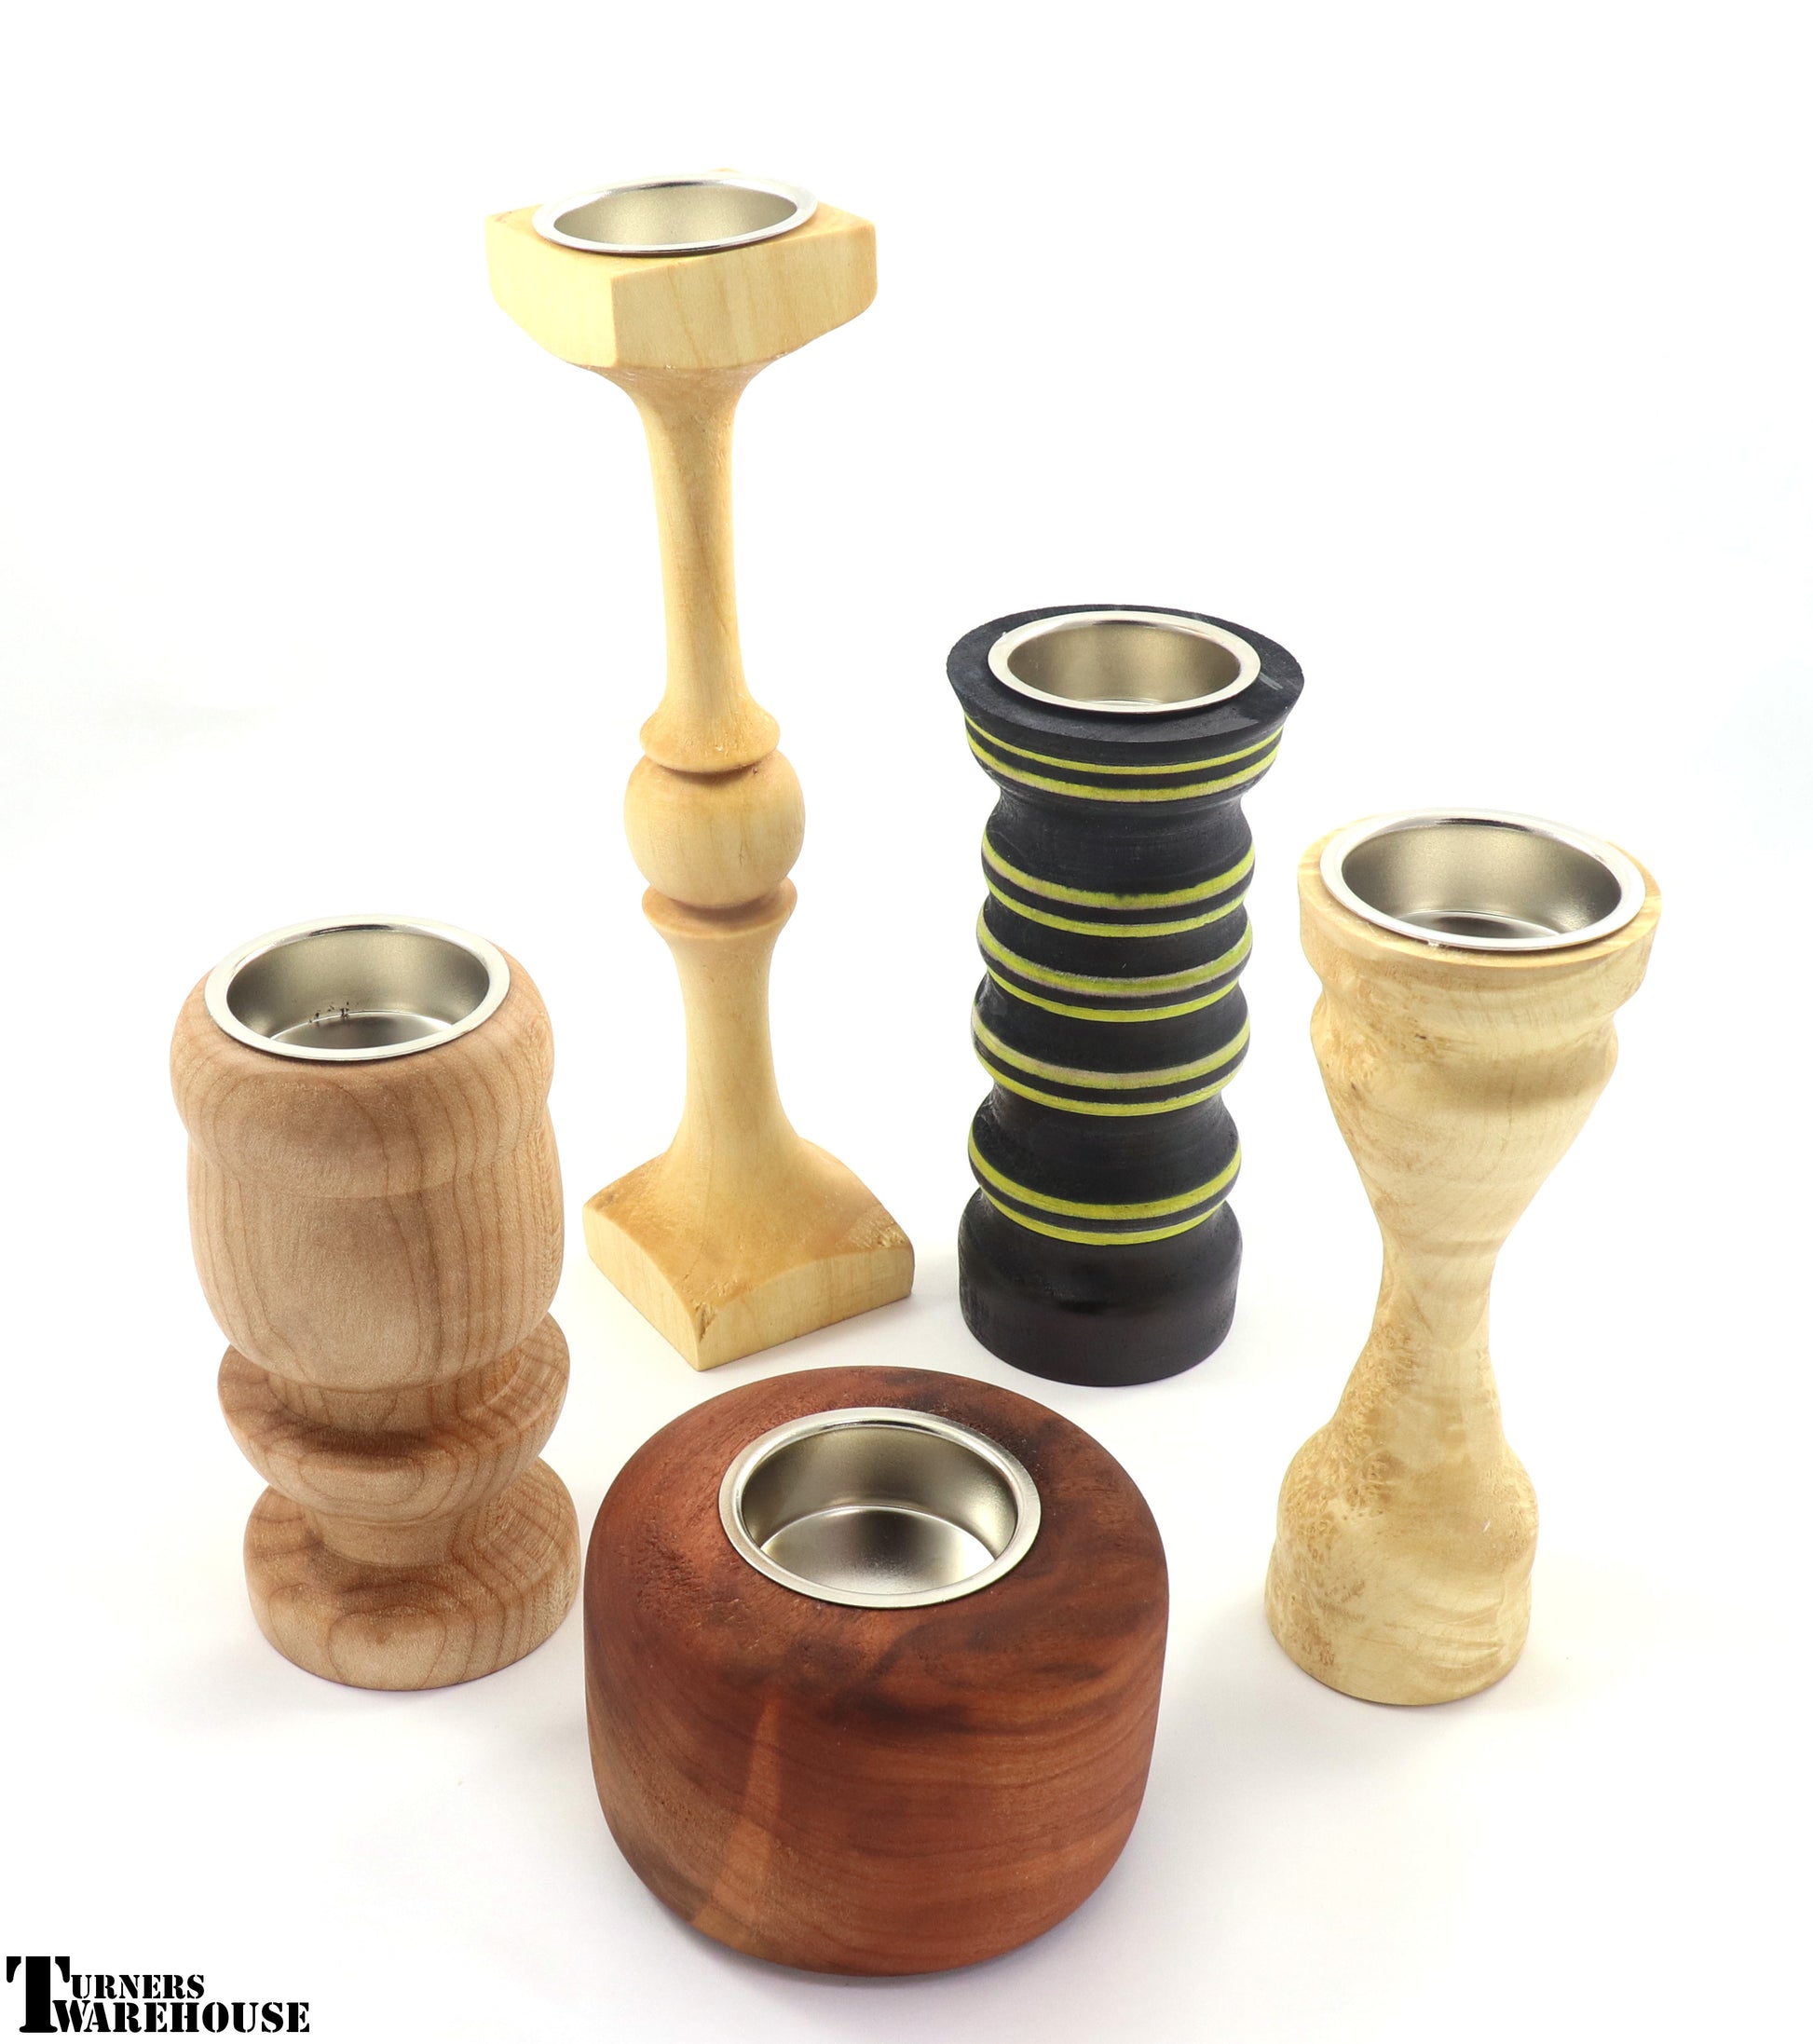 Candle Cups: Nickel (Pack of 5) [Candle Cups: Nickel (Pack of 5)] - R52.00  : Mr Woodturner, Pen kits, project turning kits and accessories